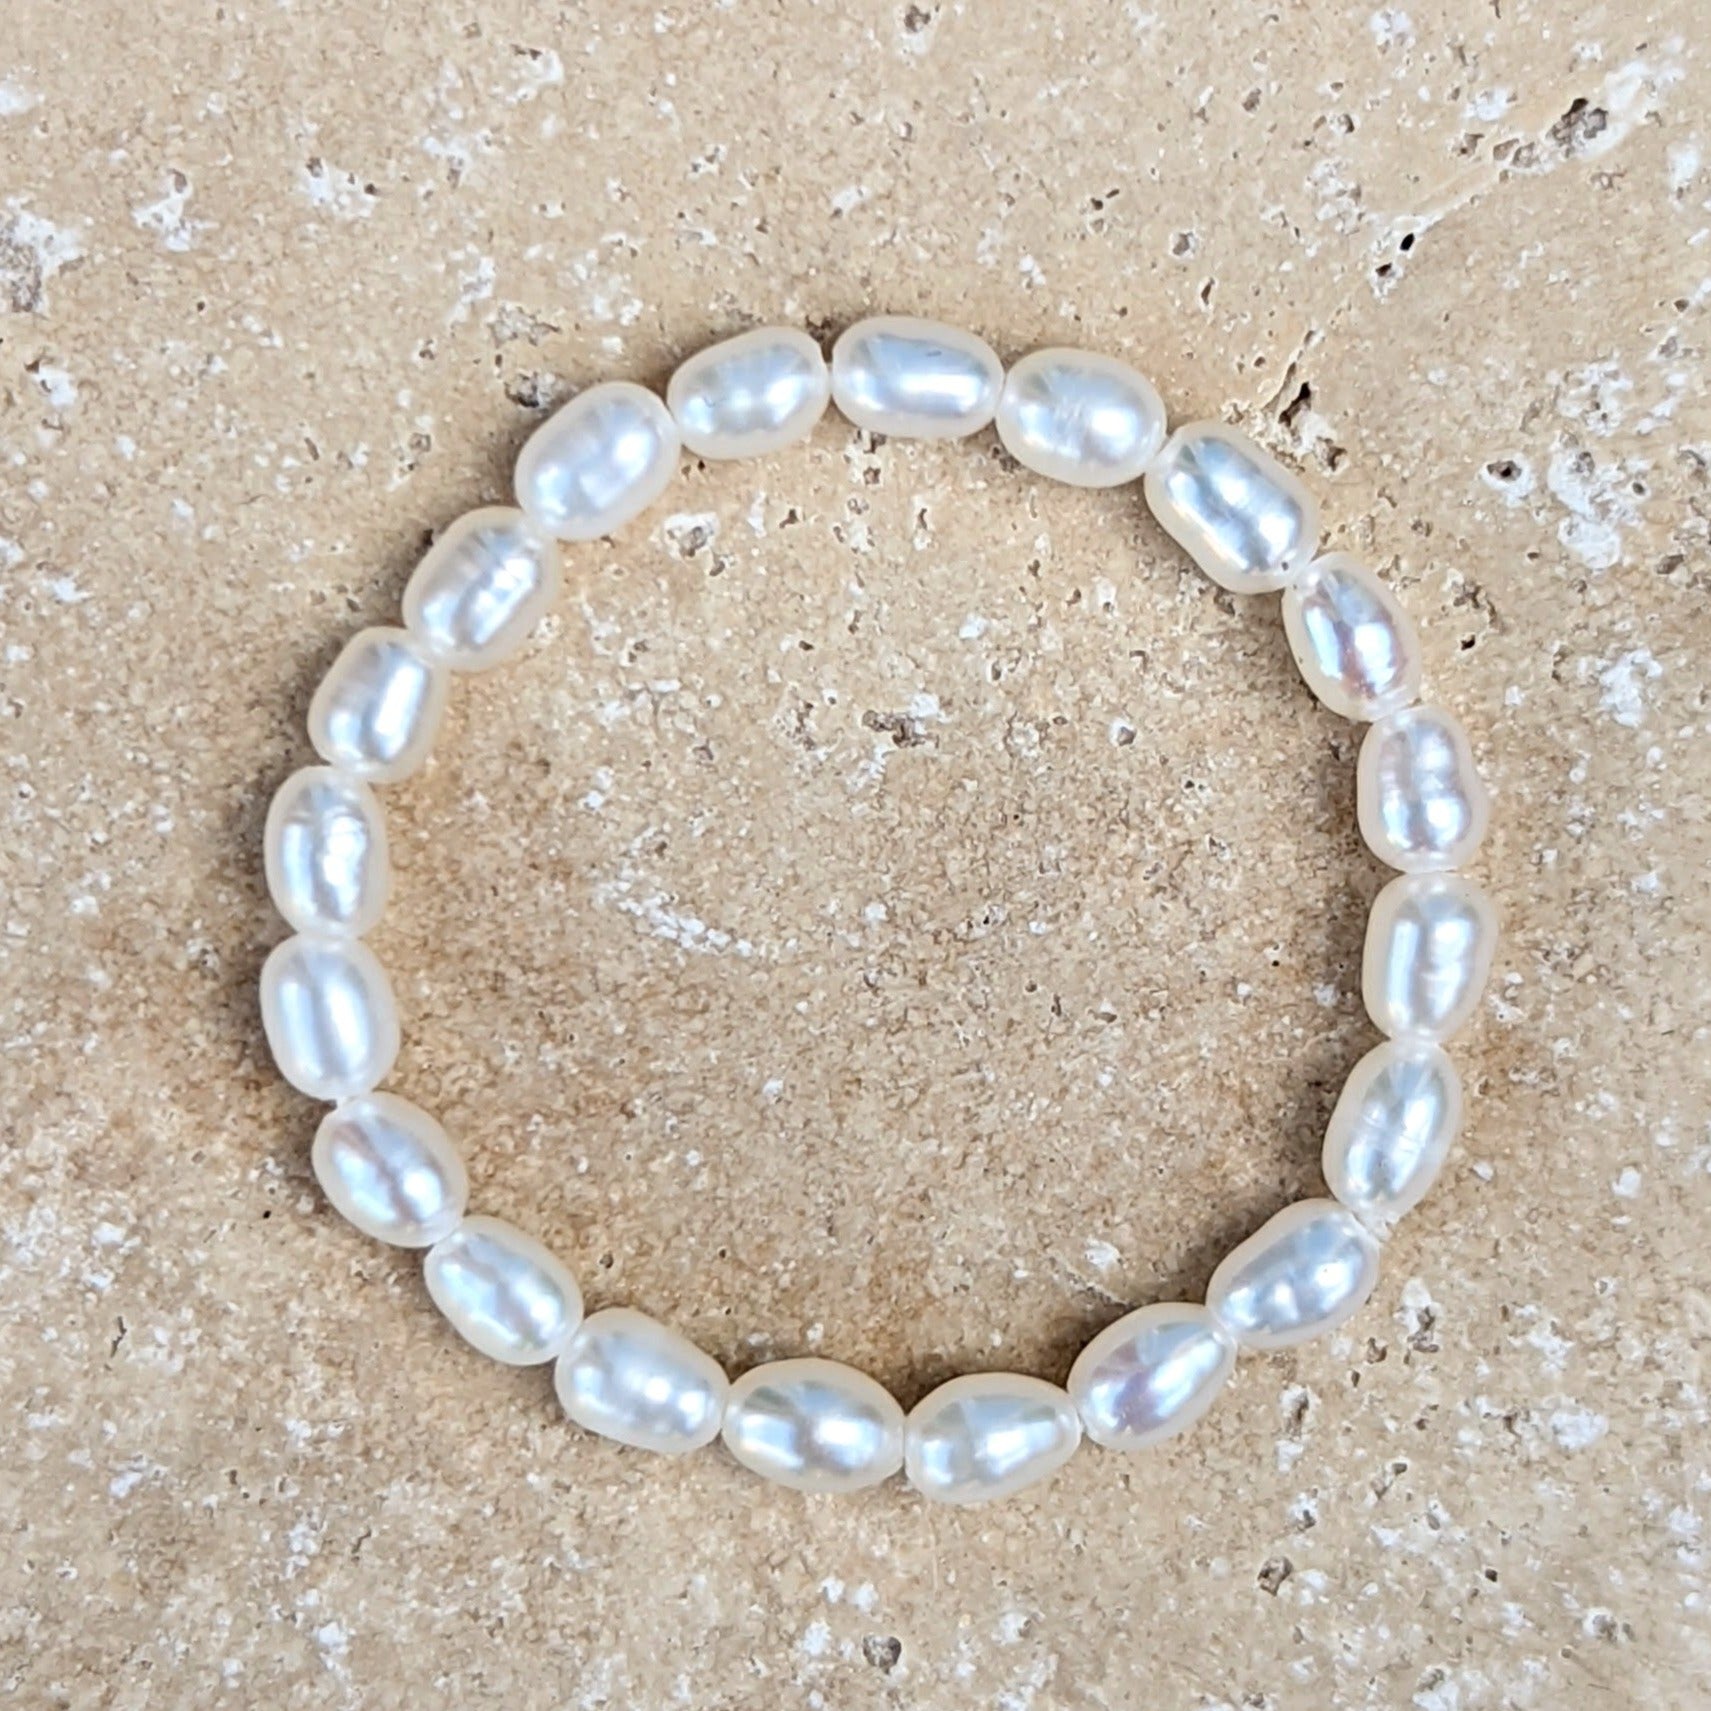 Seed pearl ring laid flat on tile